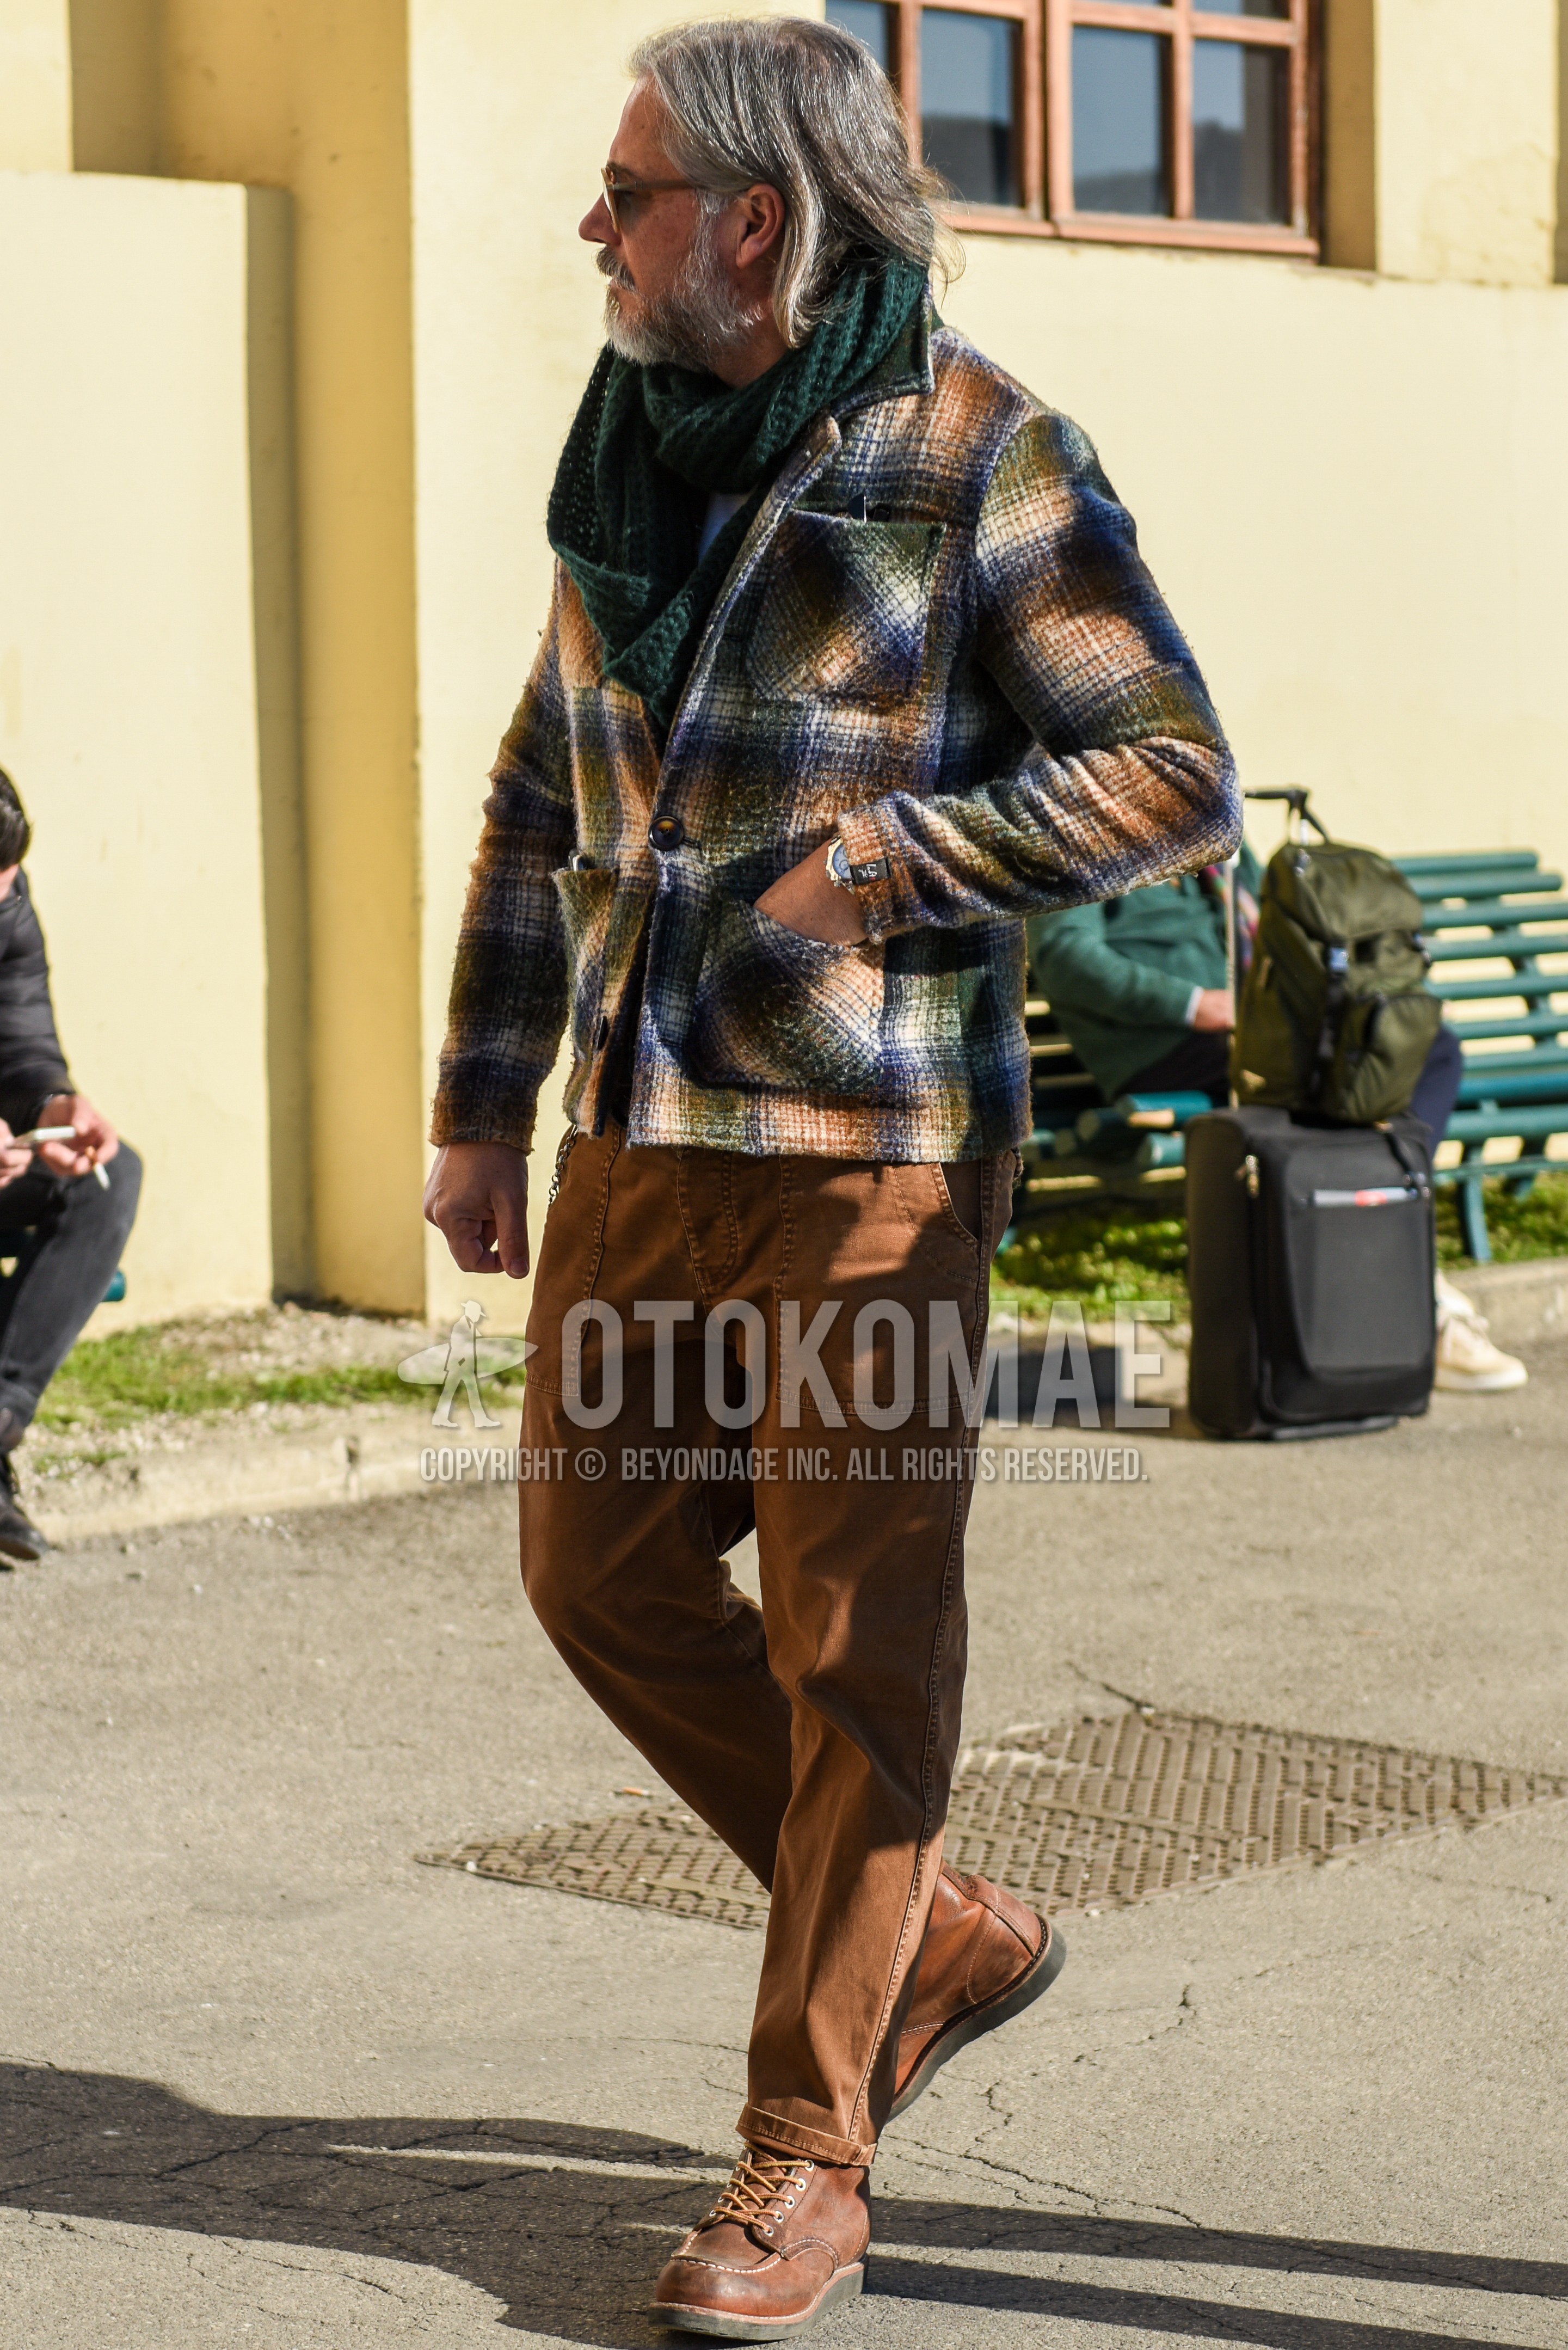 Men's autumn winter outfit with green plain scarf, multi-color check shirt jacket, brown plain chinos, brown work boots.